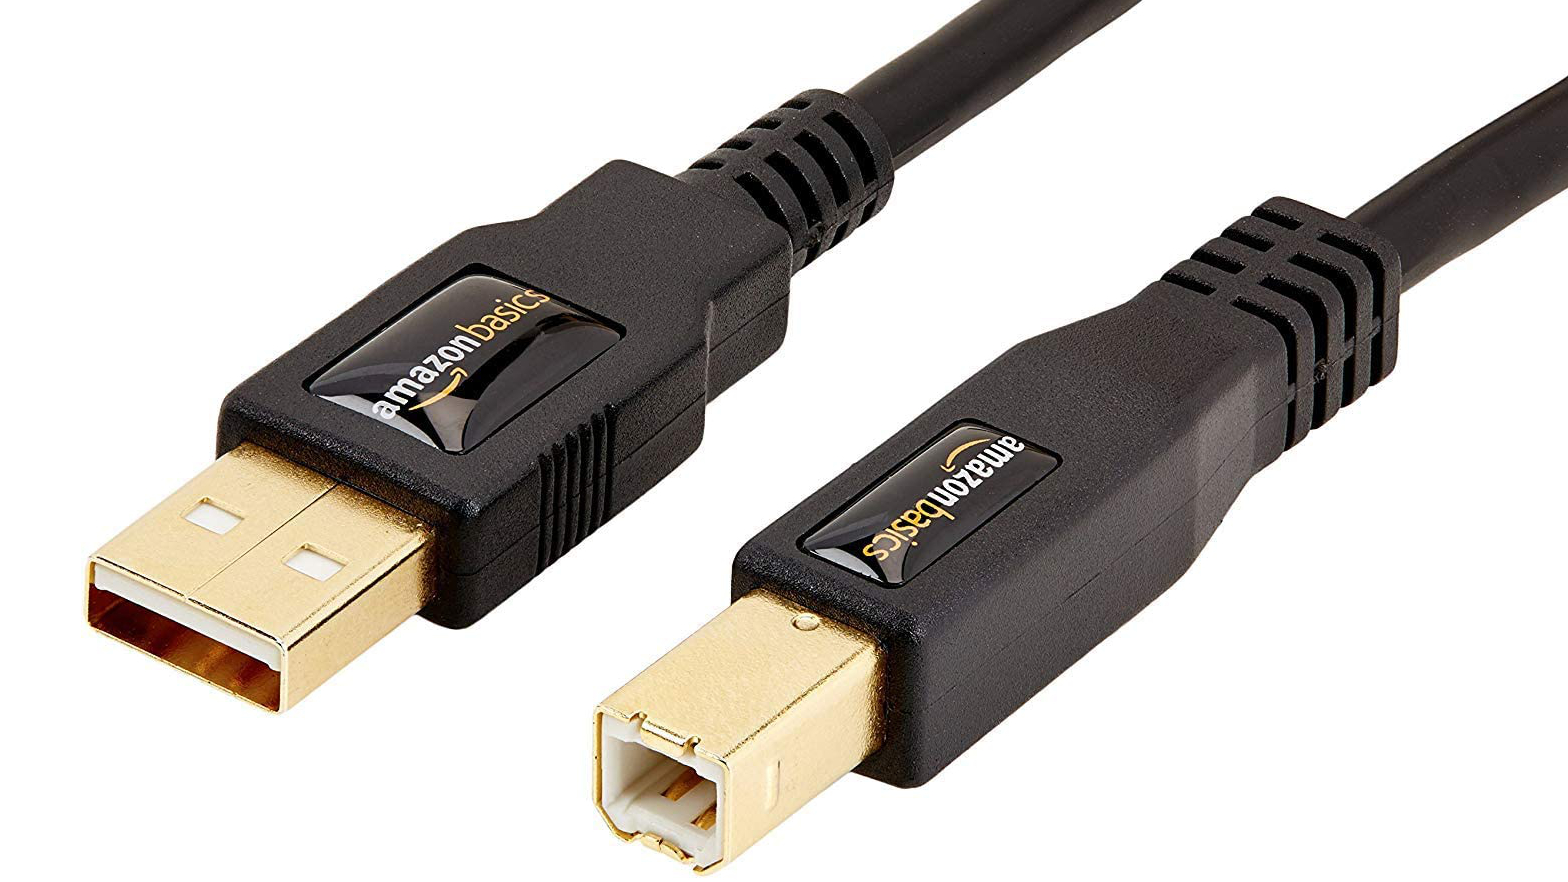 skærm Stænke leder Types of USB cables: Here's what you need to know - Android Authority